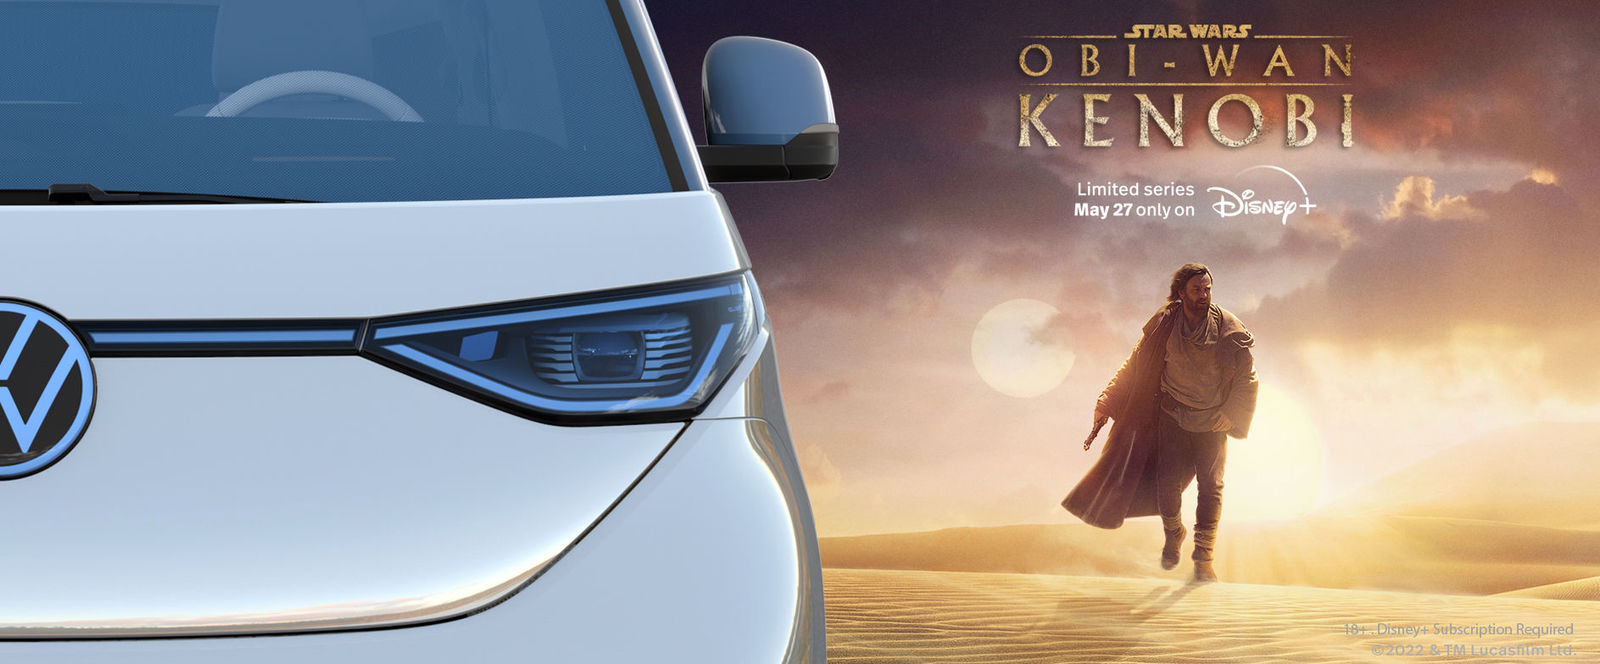 Volkswagen joins forces with “Obi-Wan Kenobi” for the launch of the new all-electric ID. Buzz